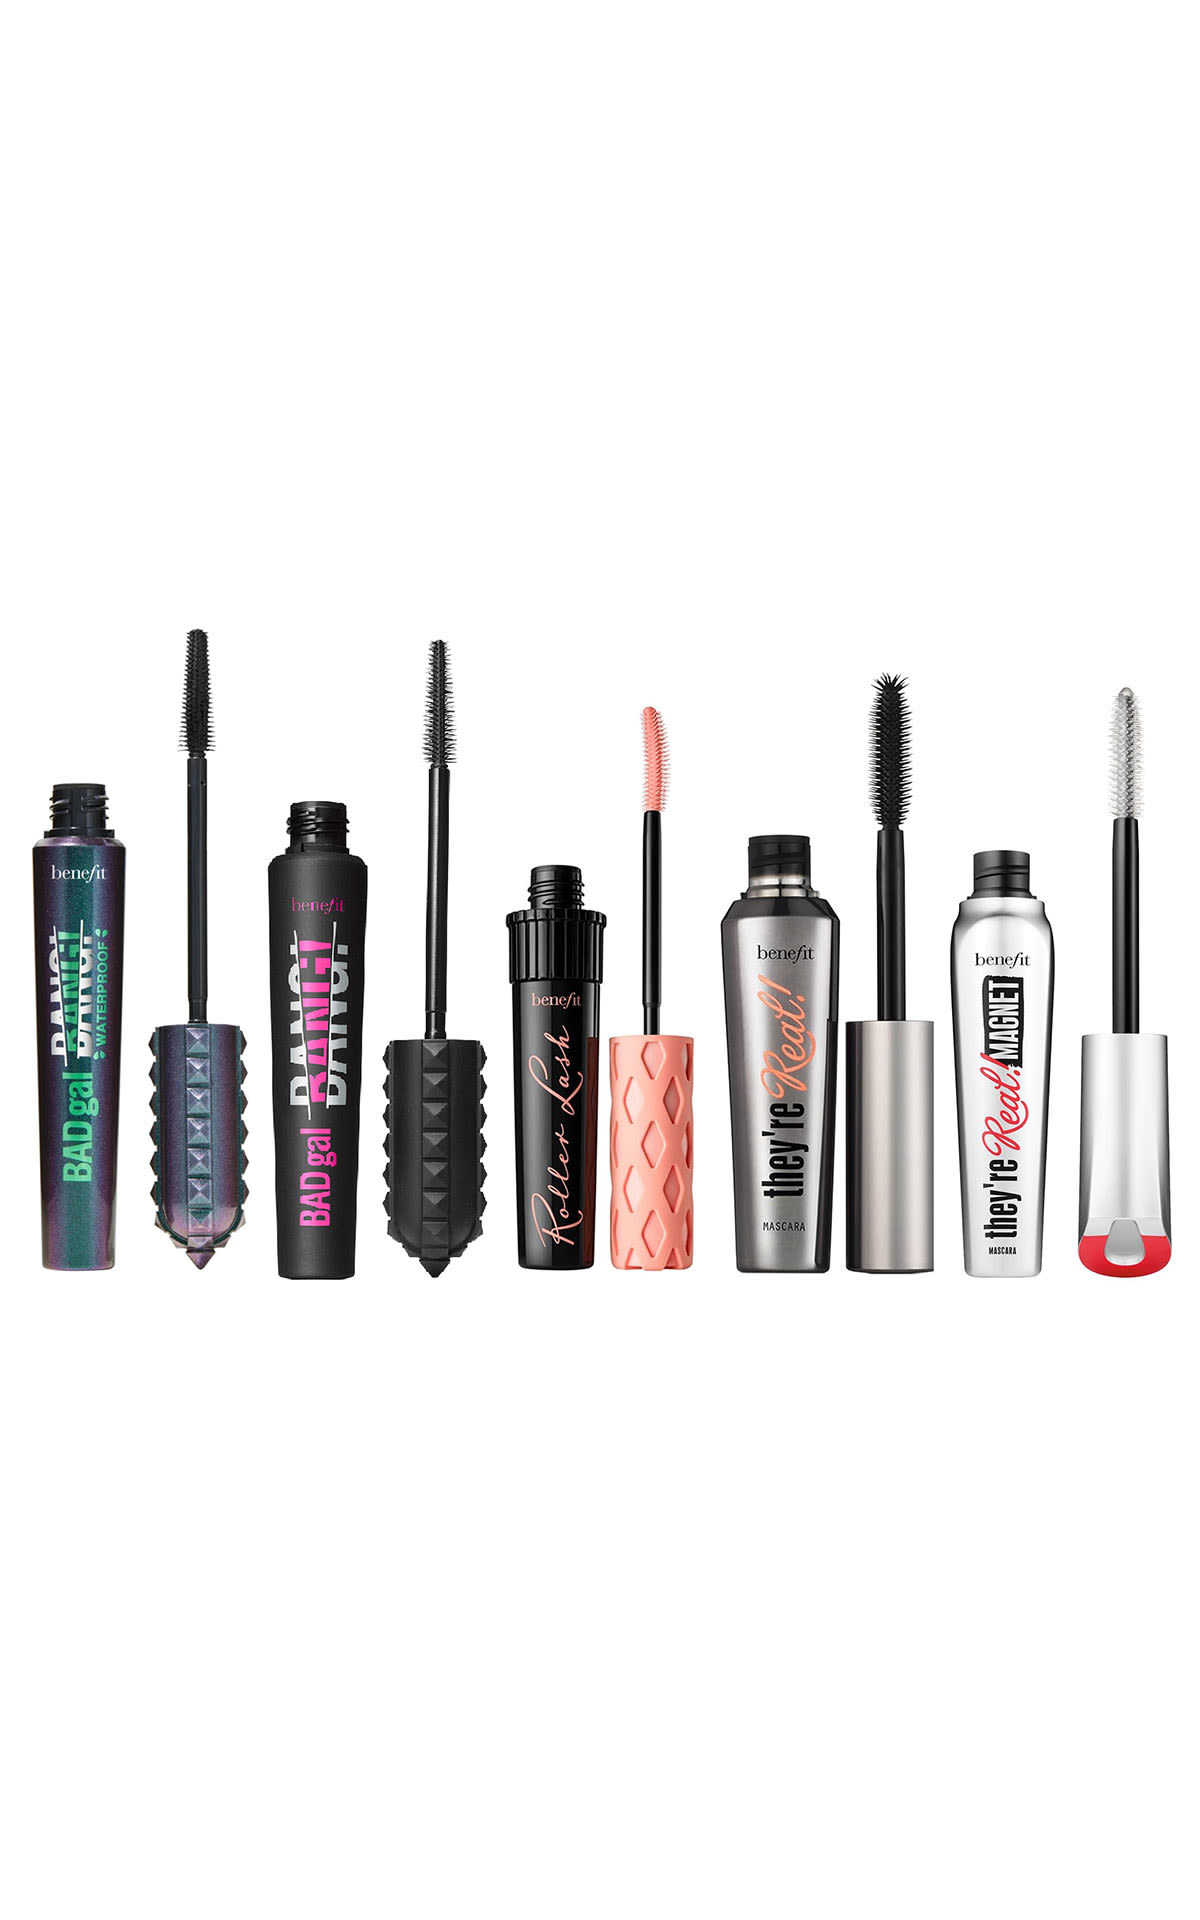 Benefit Cosmetics Mix and match 2 for £35 mascara from Bicester Village